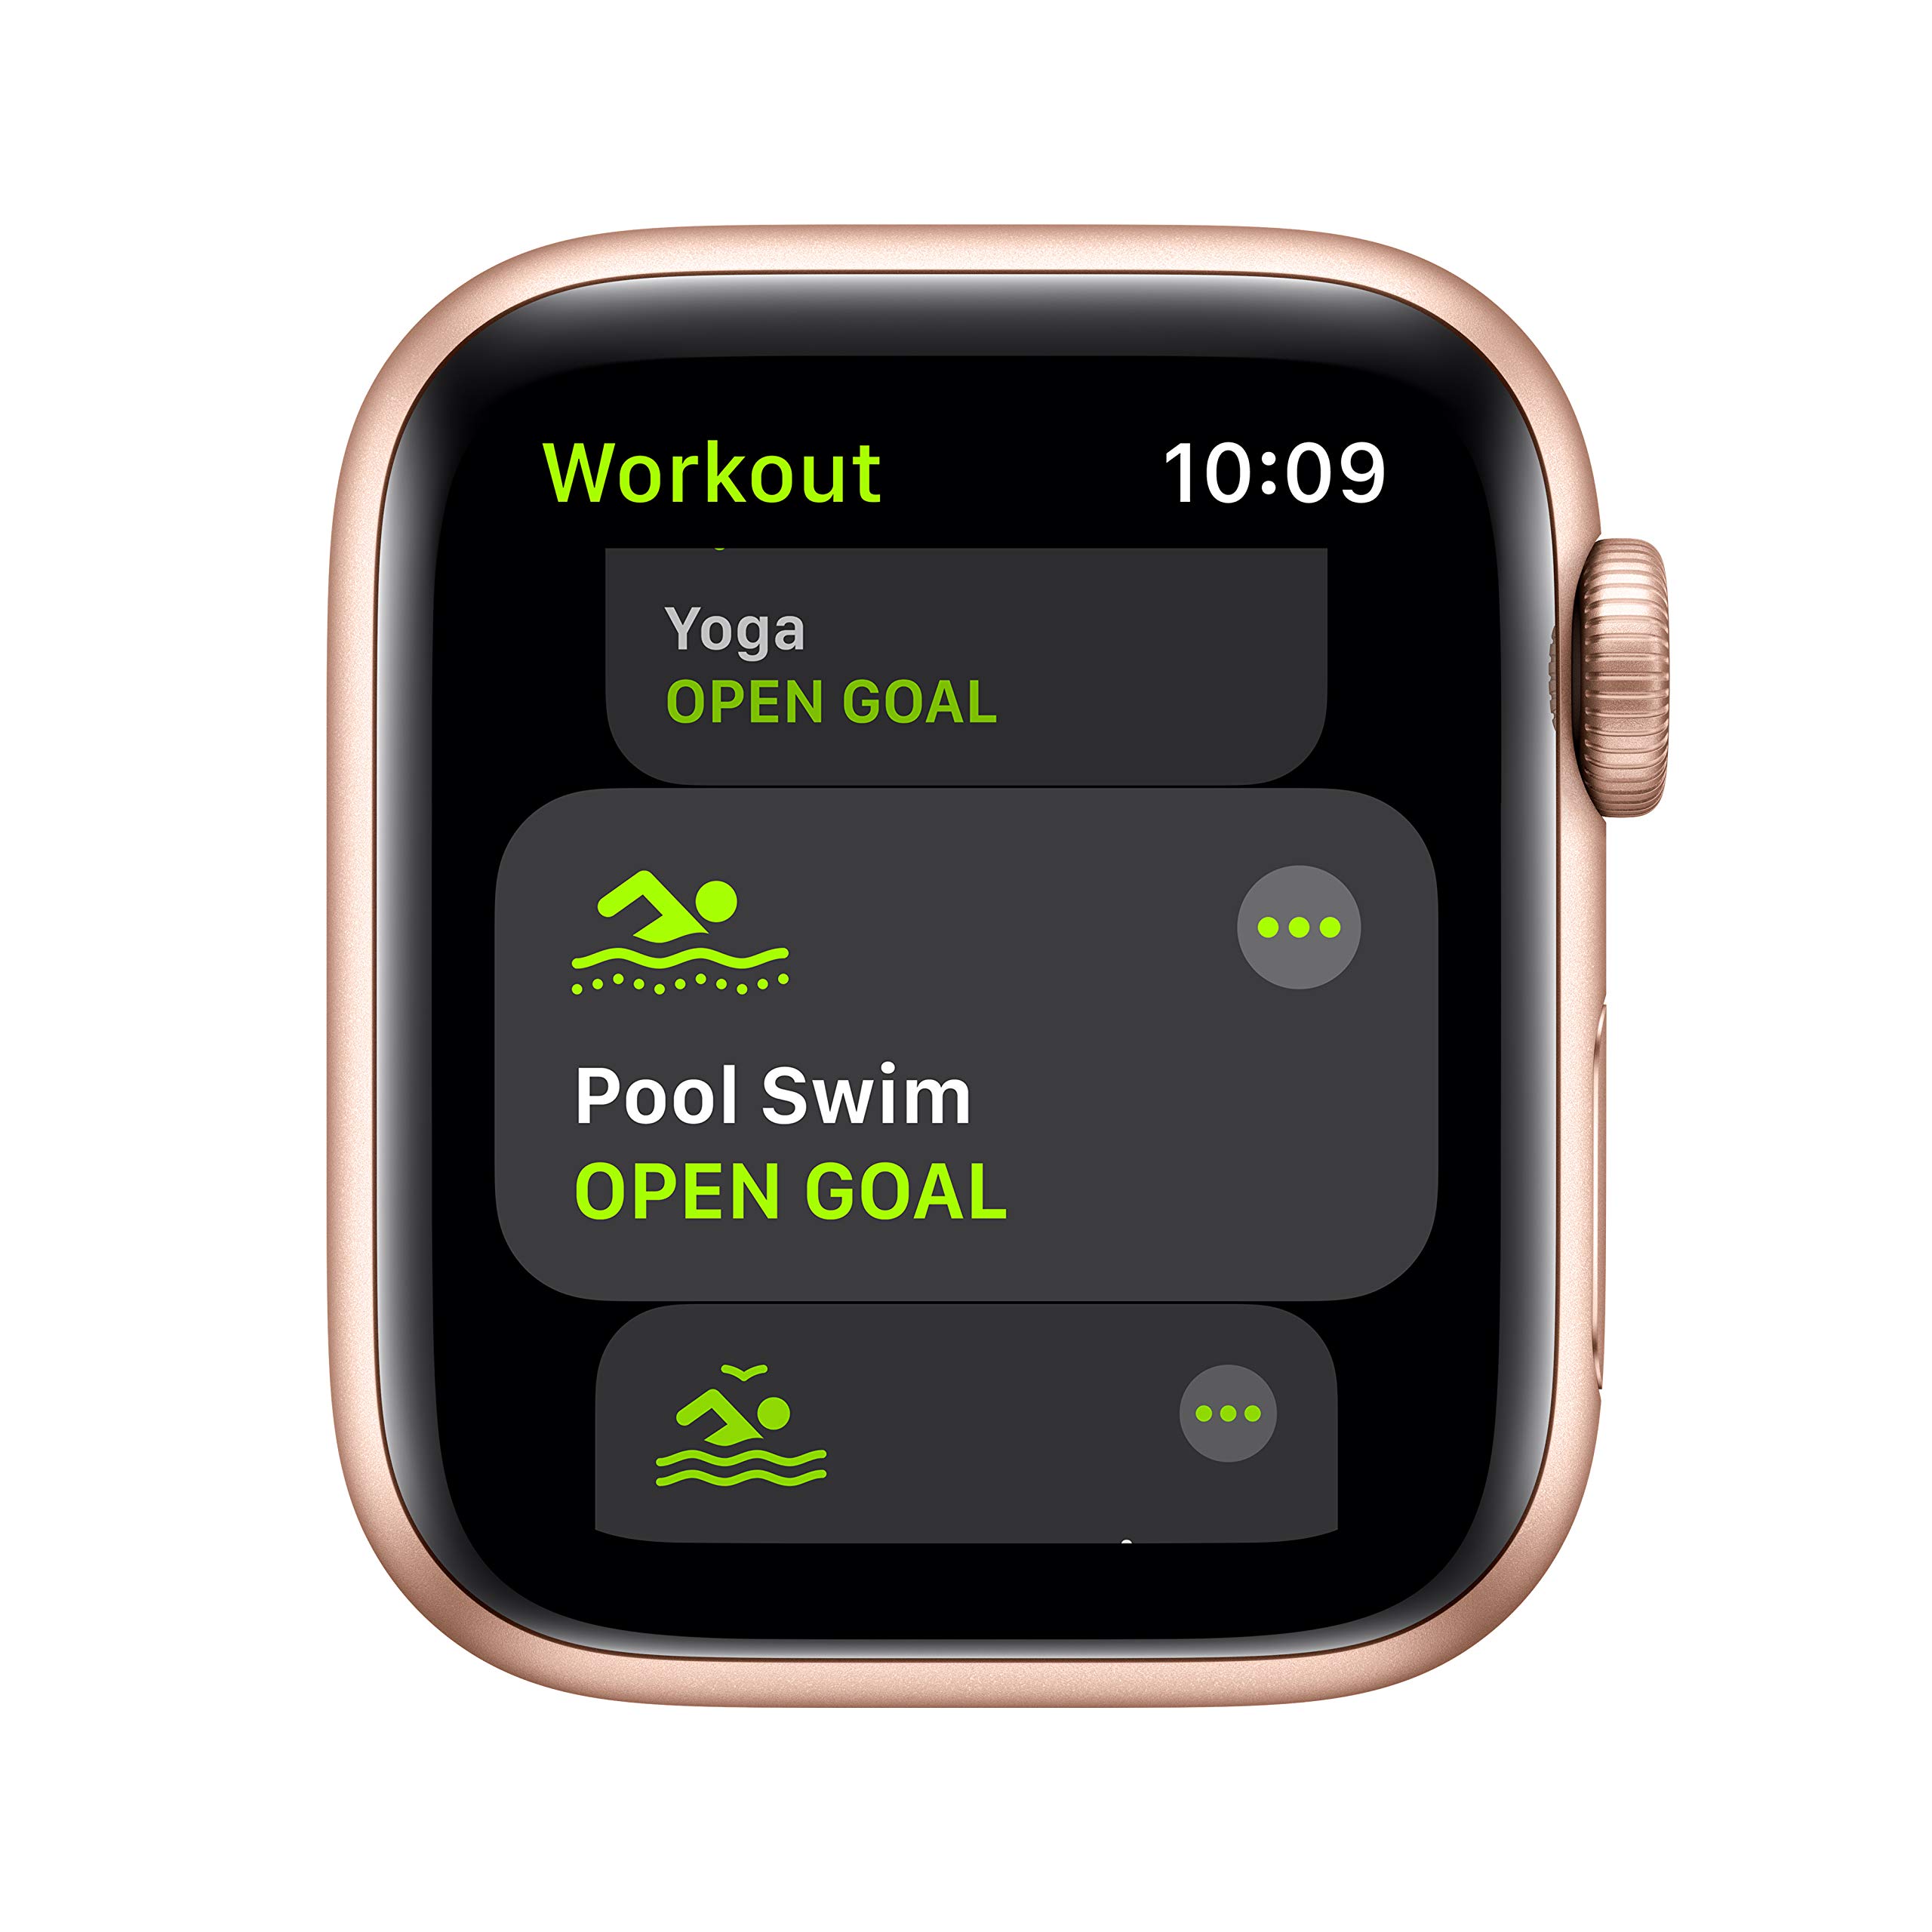 Apple Watch SE (GPS, 40mm) - Gold Aluminum Case with Pink Sand Sport Band